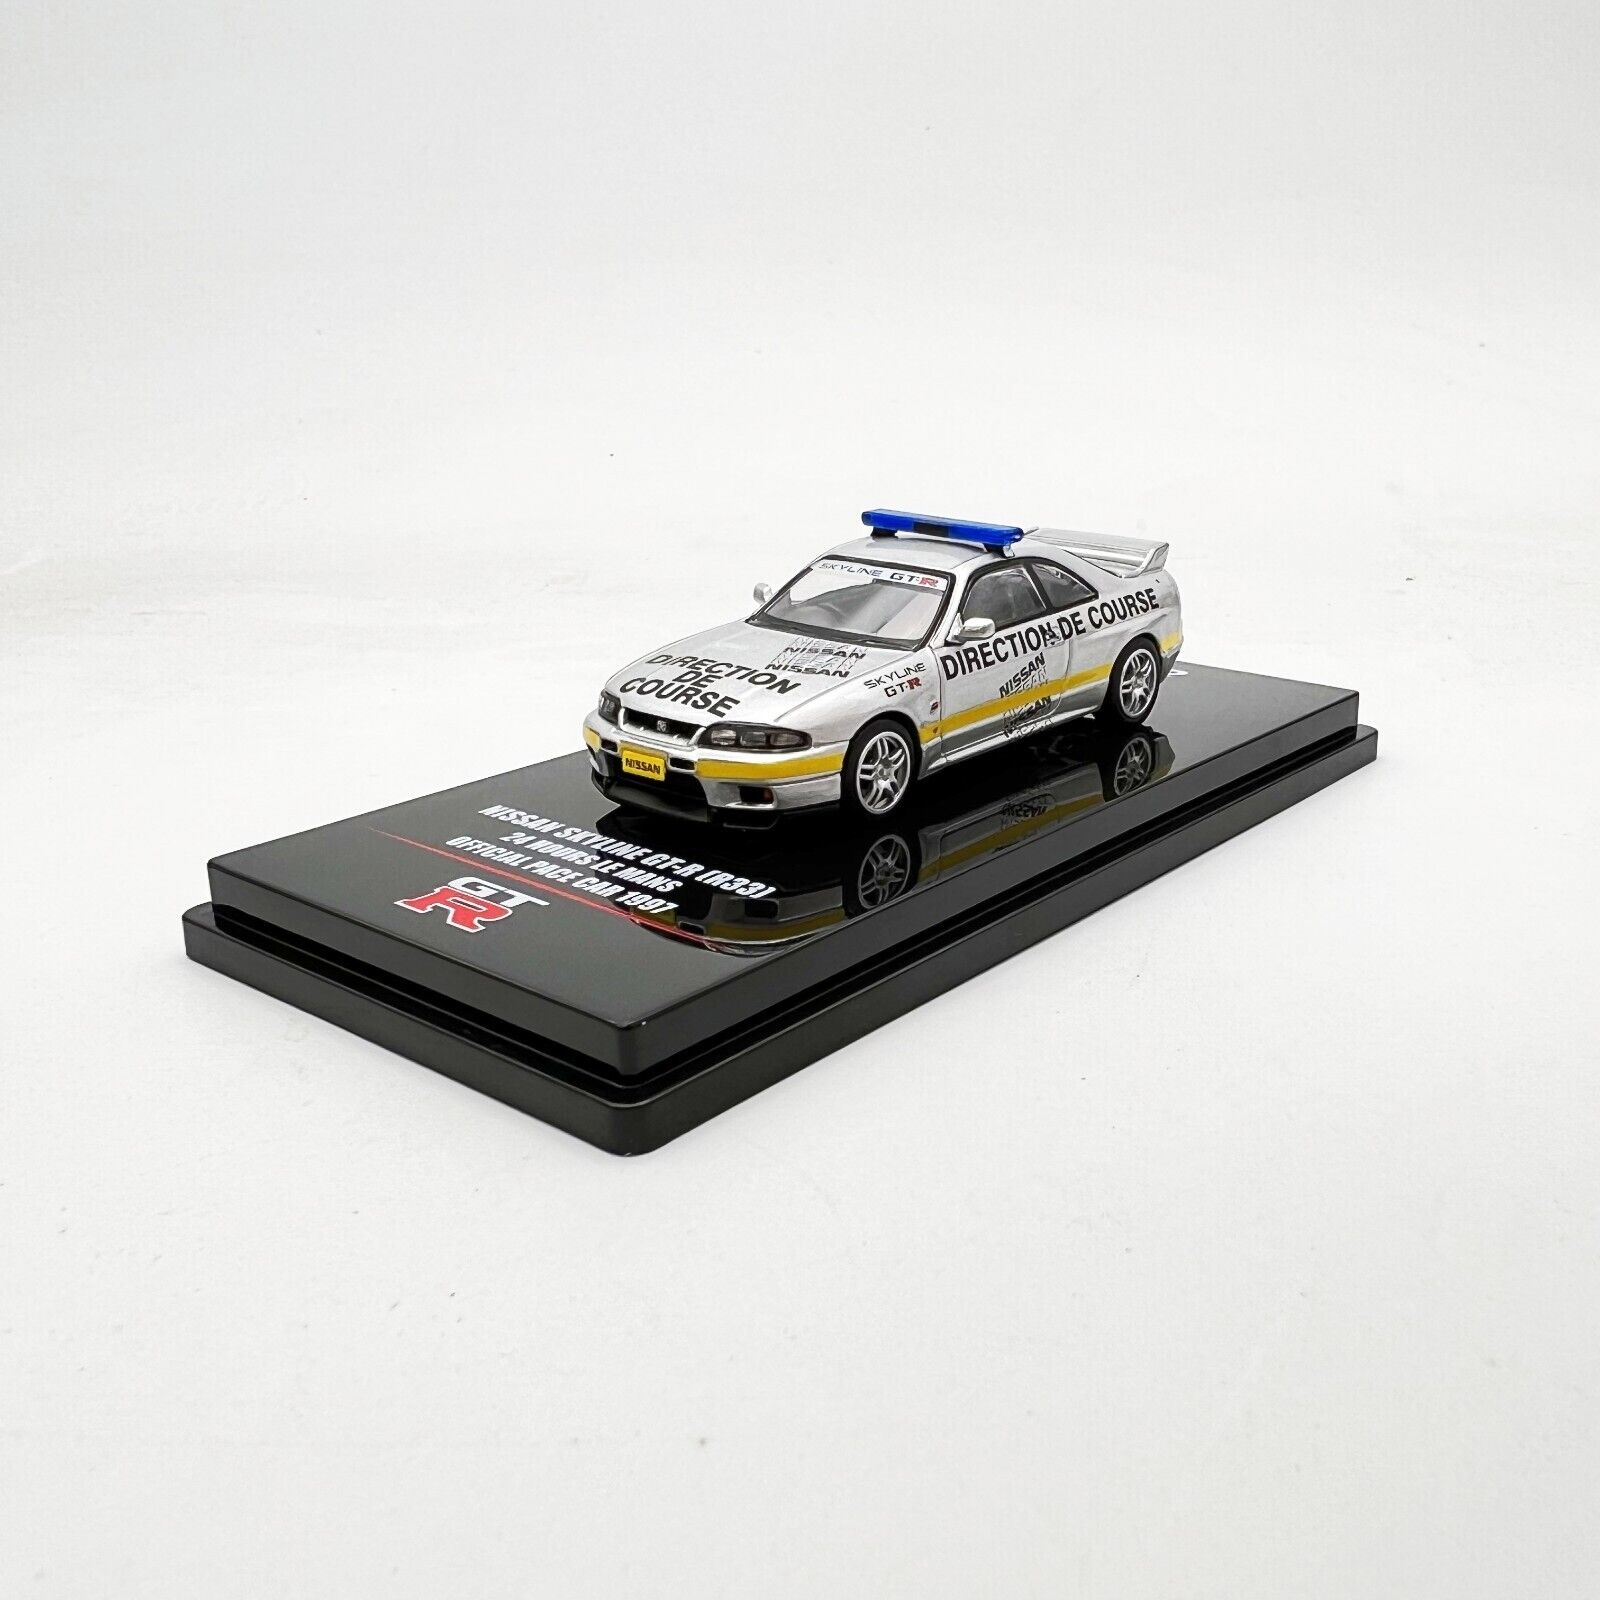 INNO64 1/64 Y XJCC GT-R R33 E}24 ItBVy[XJ[ 1997INNO64 1:64 Nissan Skyline GT-R R33 24 Hours LE Mans Official Pace Car 1997